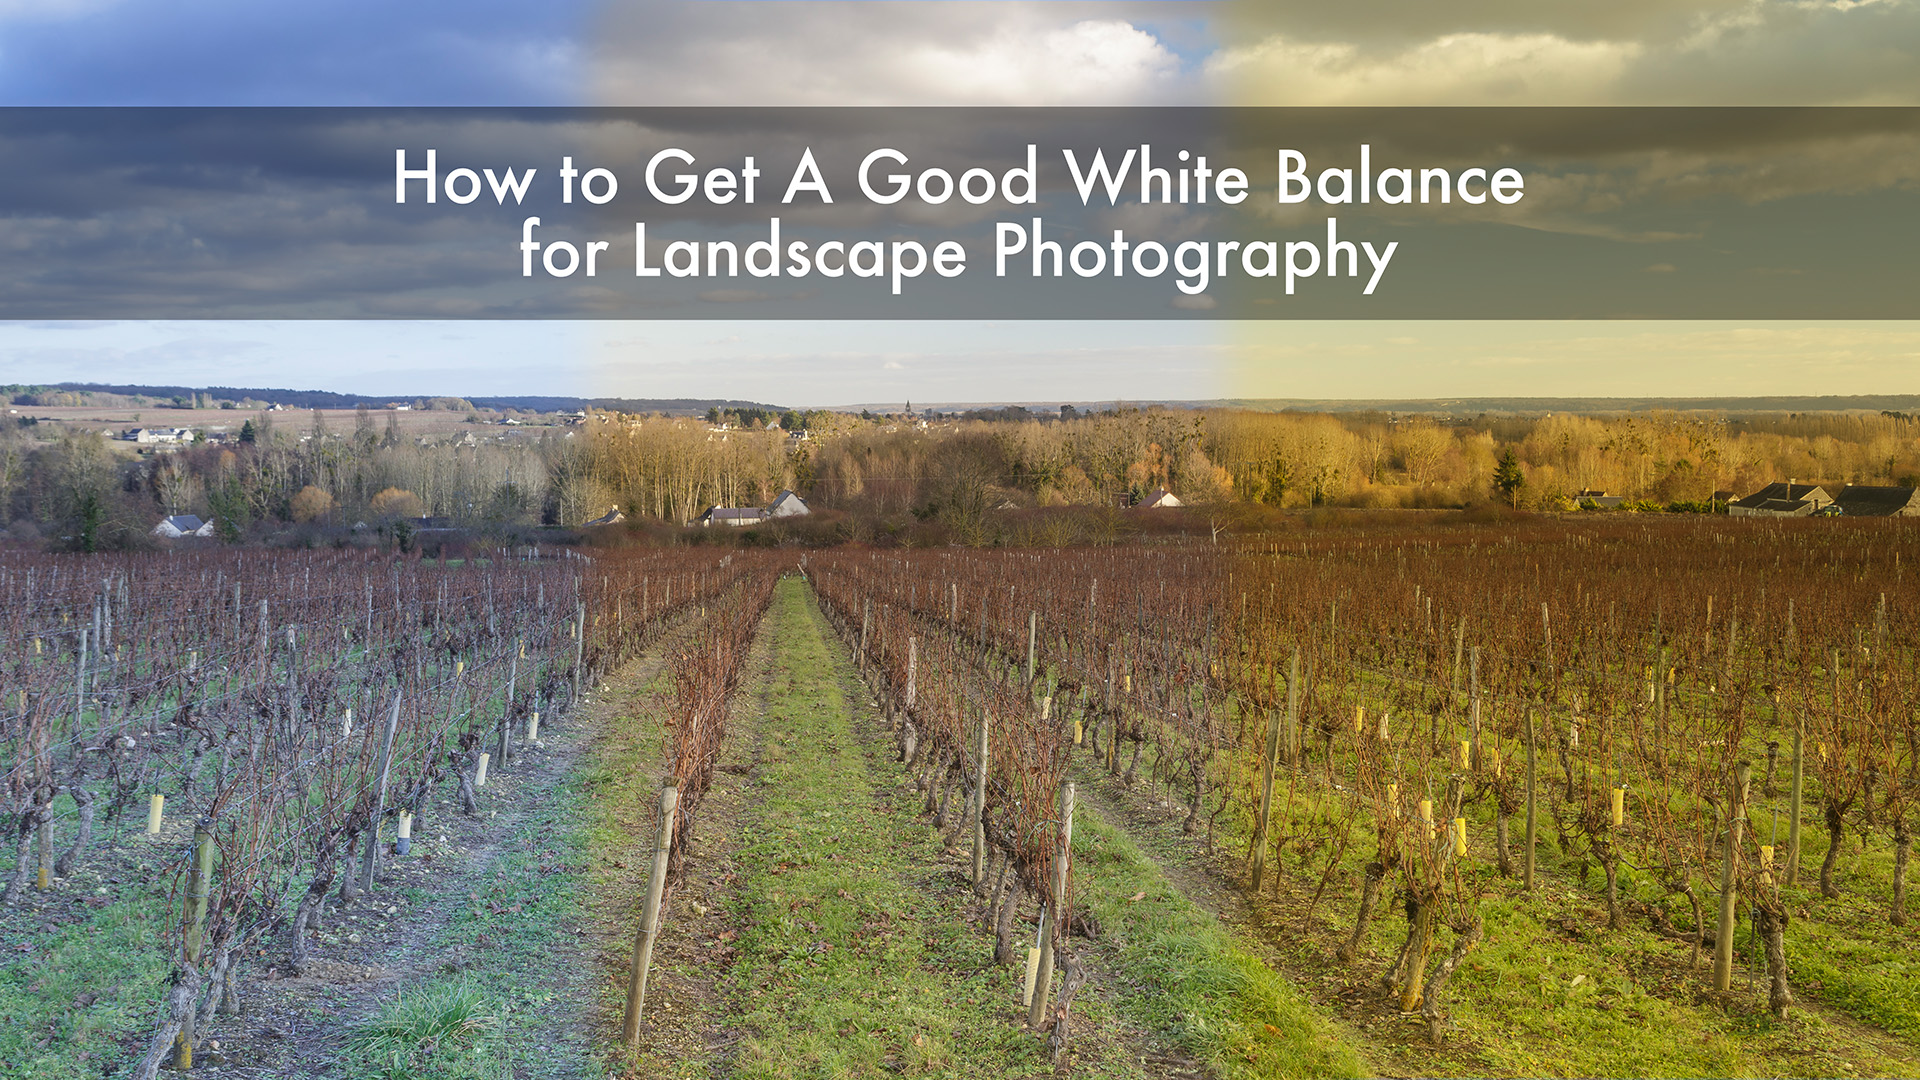 How to get a good white balance for landscape photography. Adobe Lightroom tutorial.